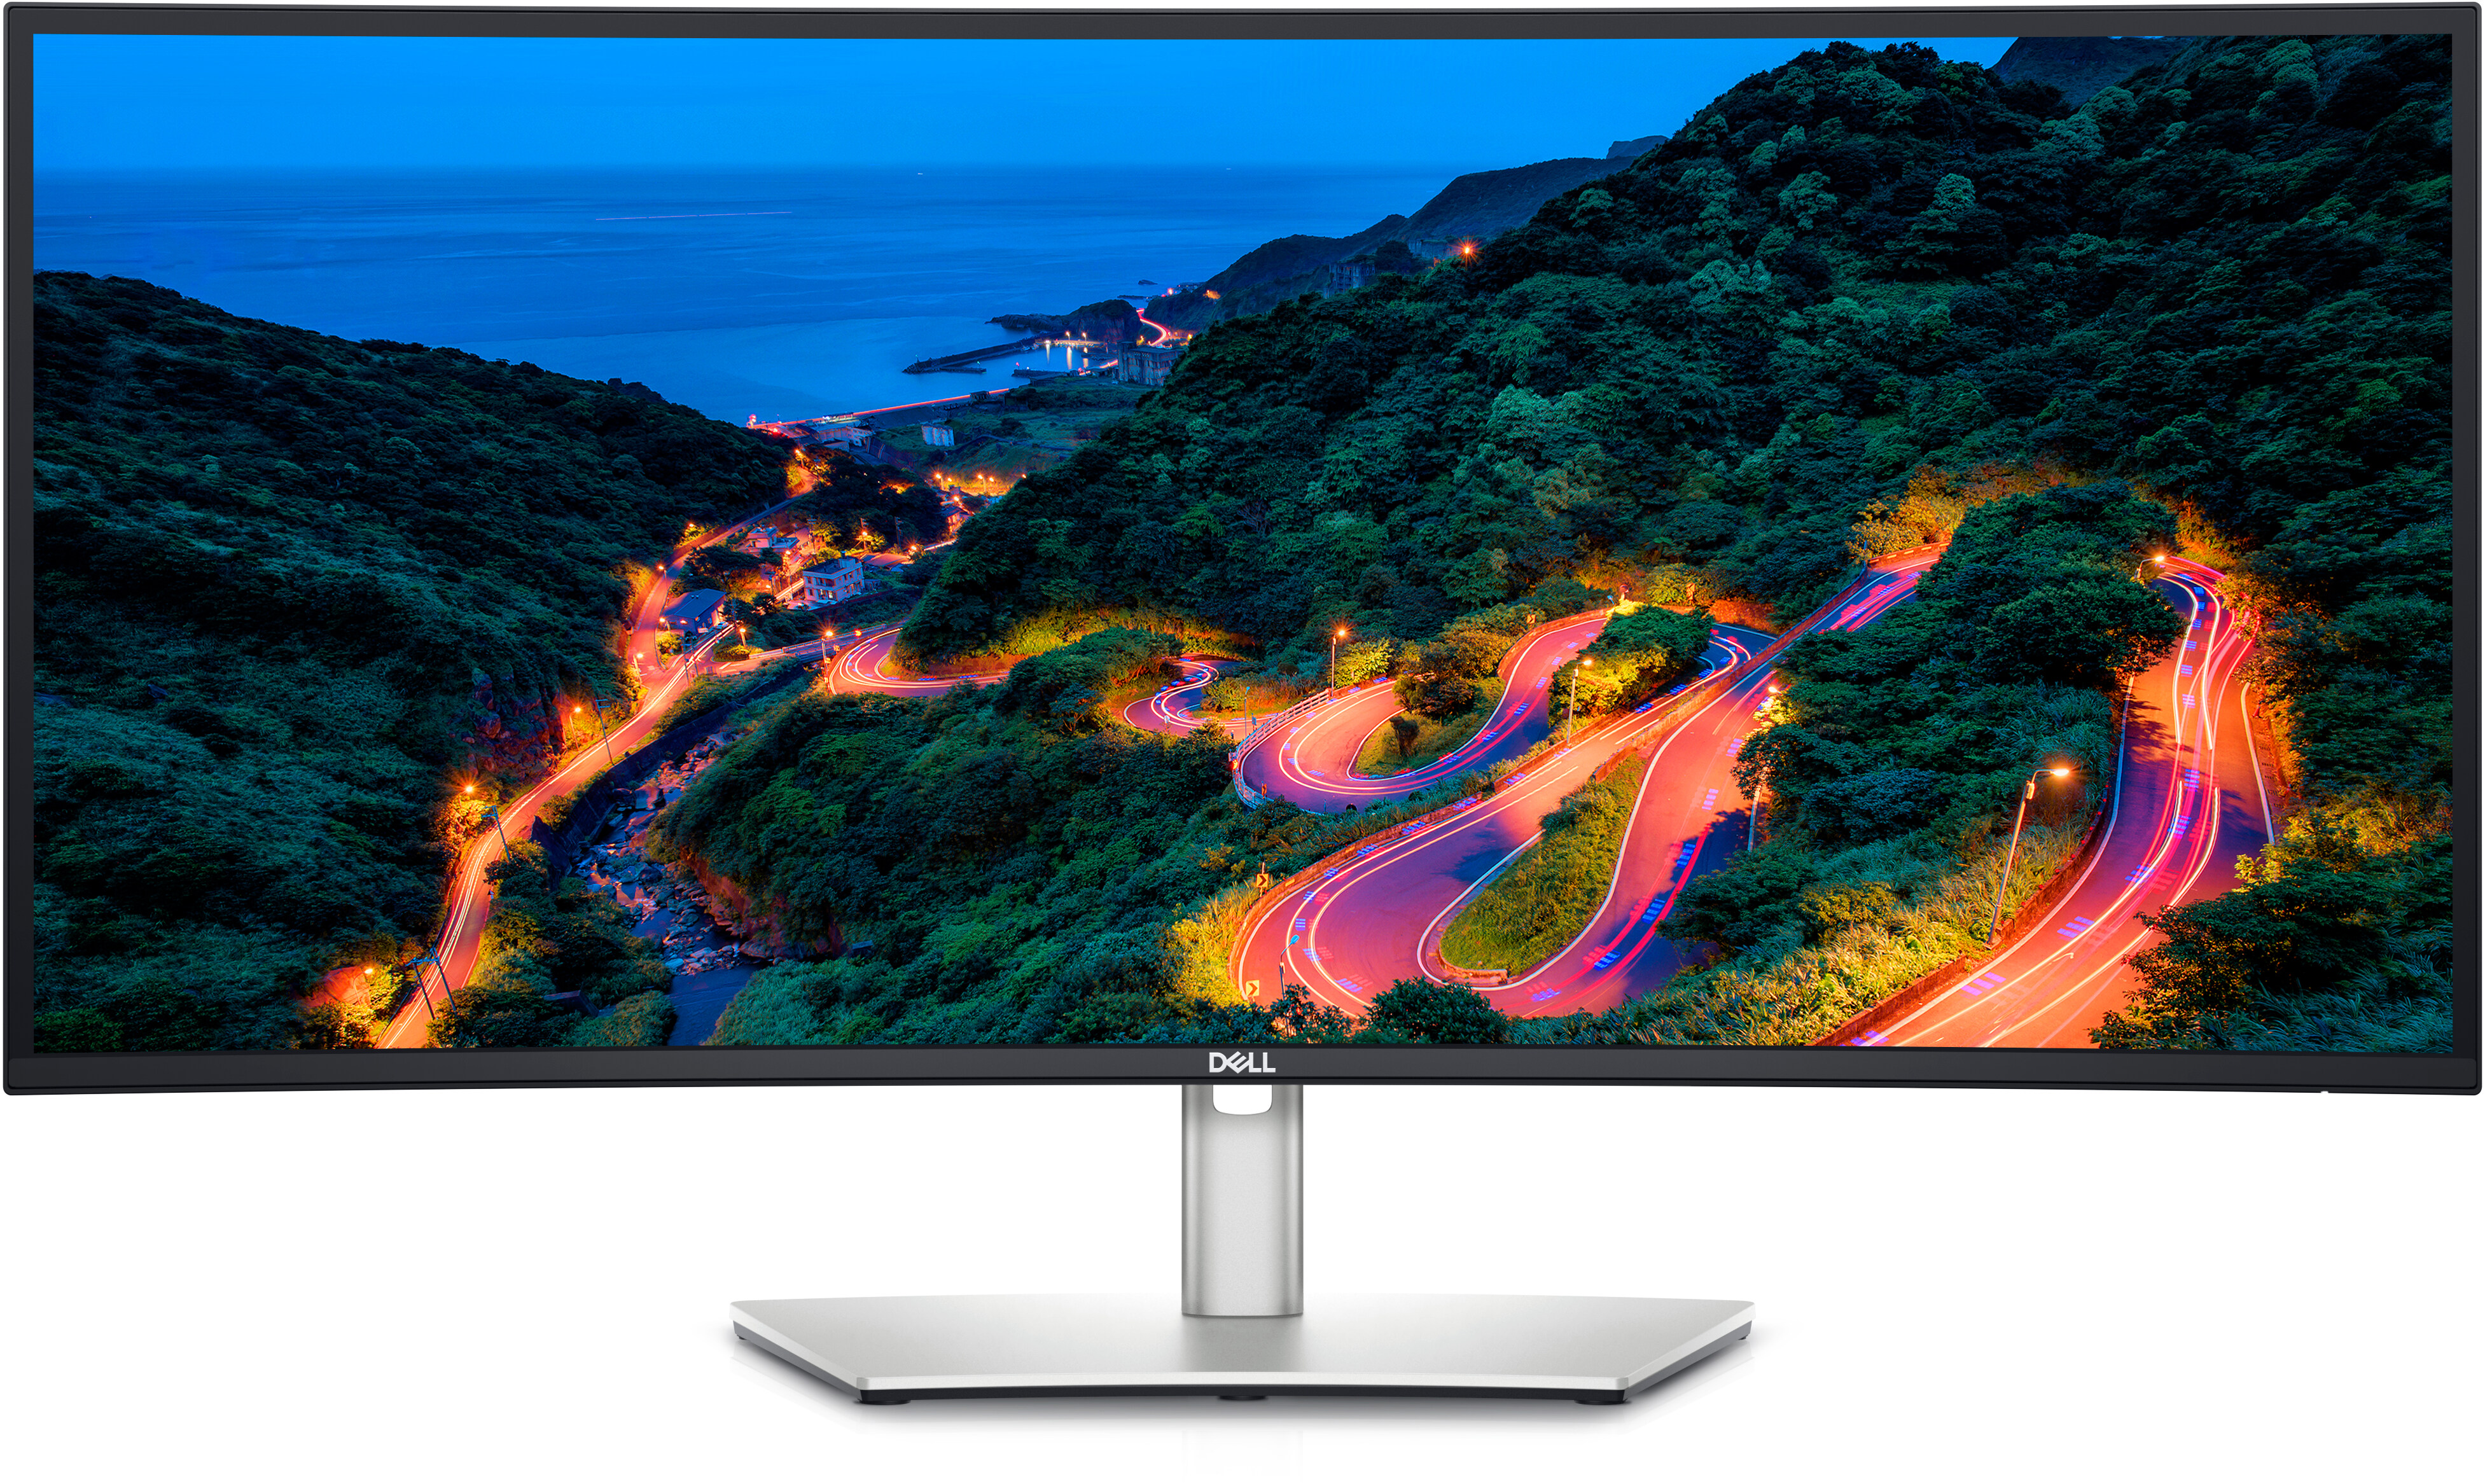 Dell 32-inch 4K USB-C Hub Monitor review: a solid work-from-home option